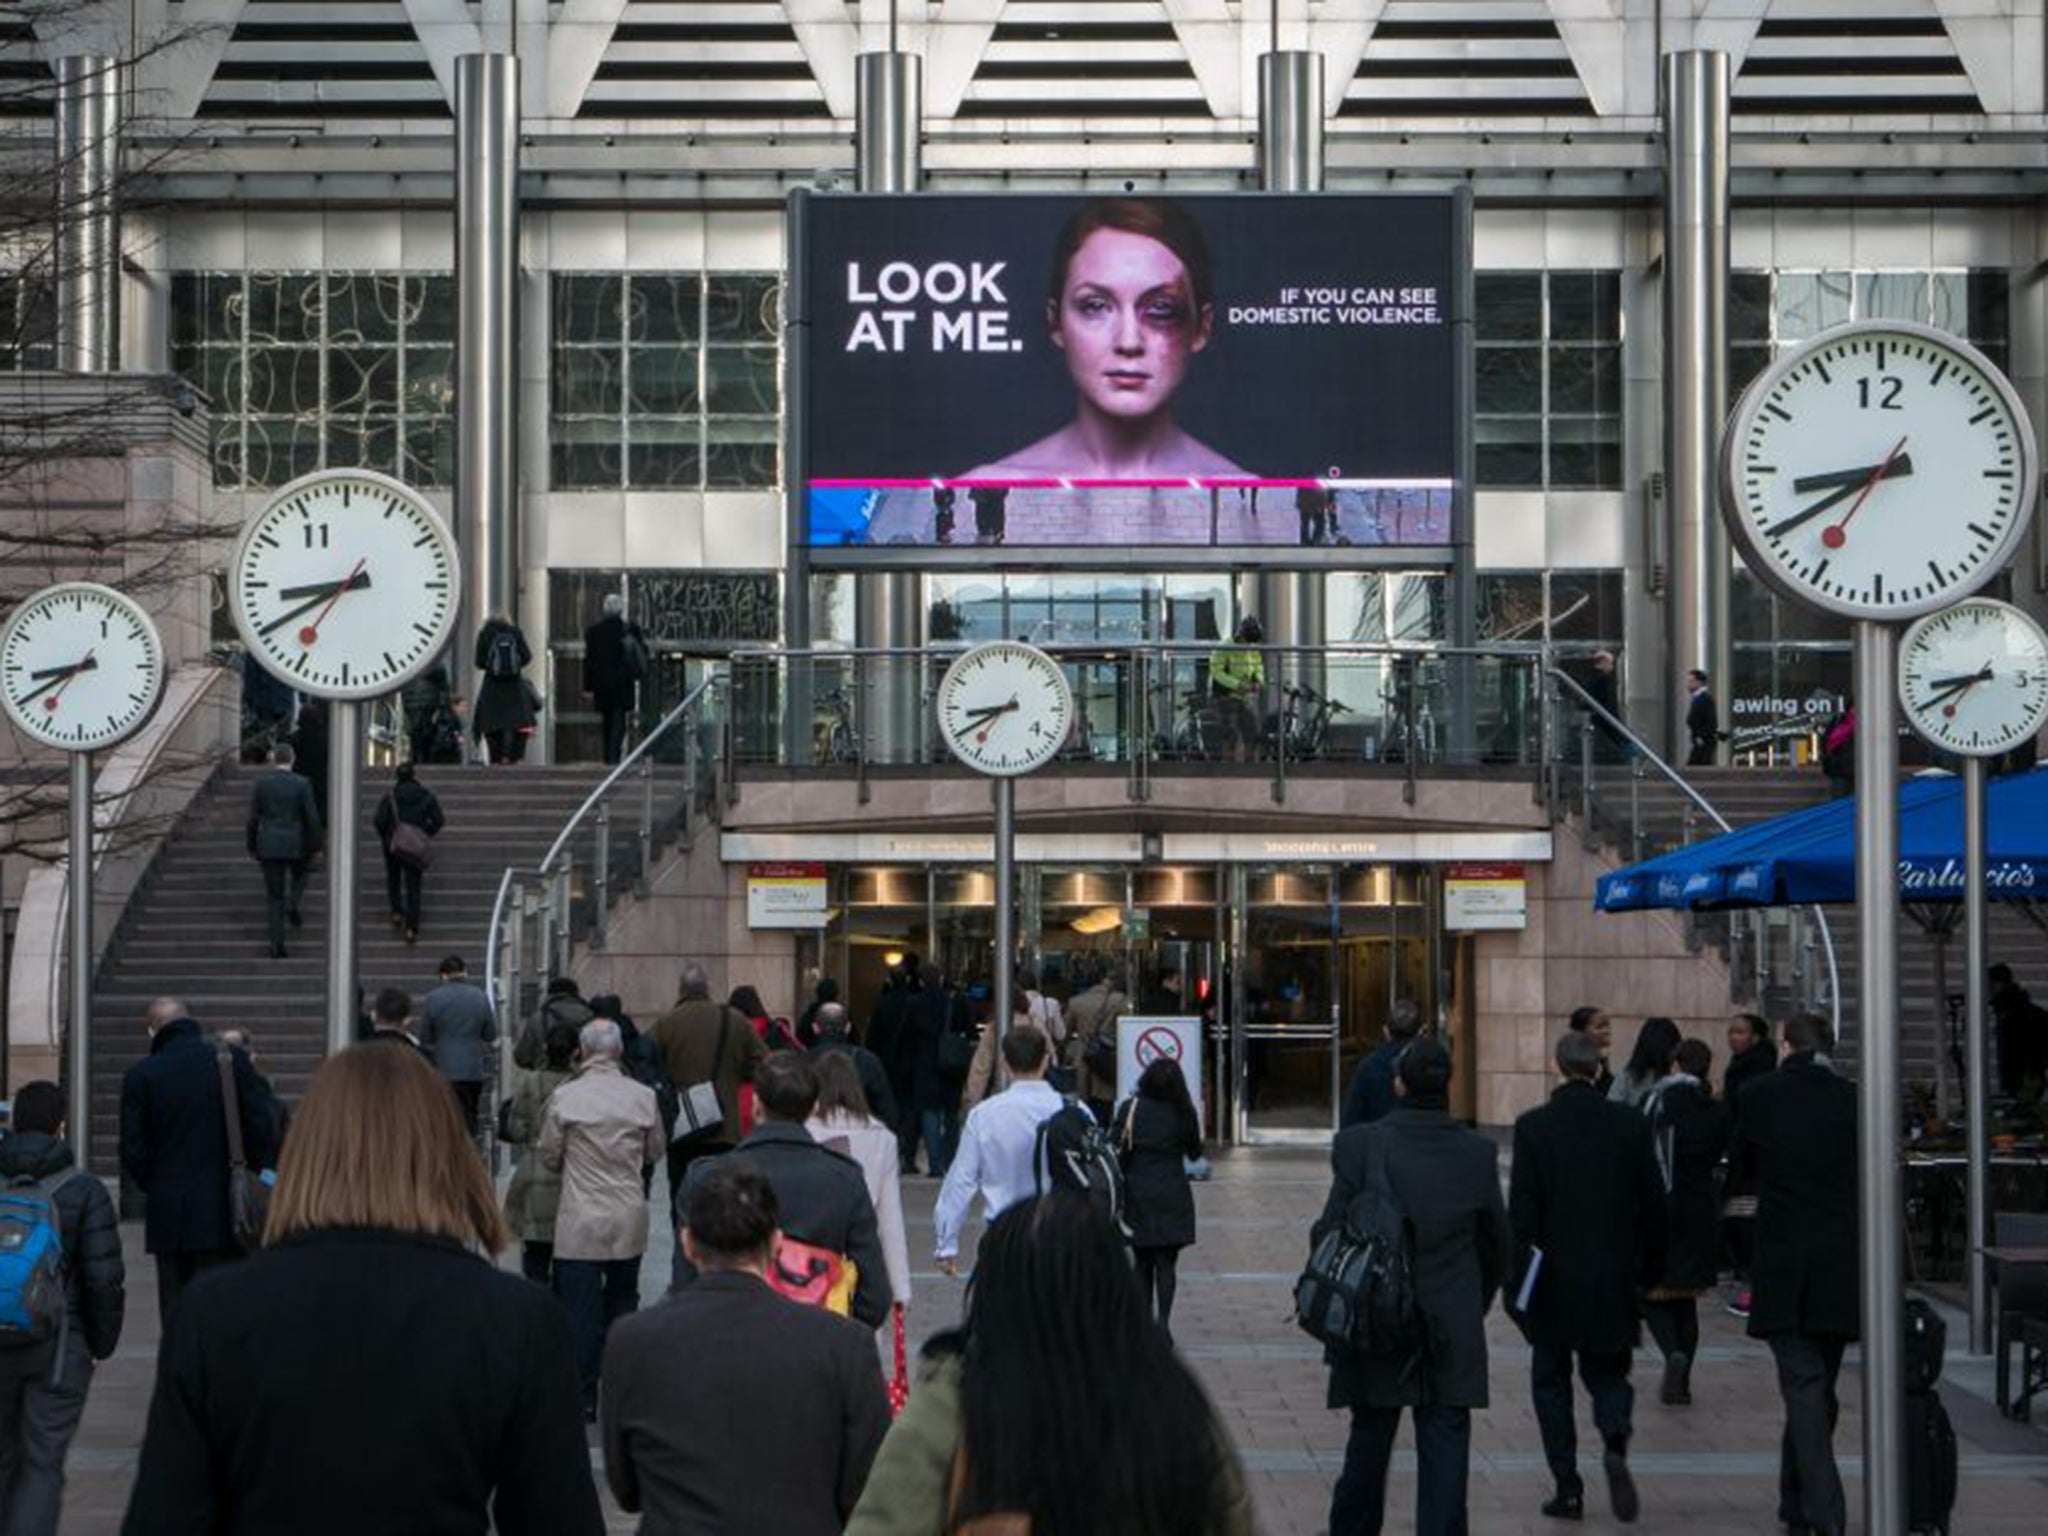 The UK’s first fully interactive billboard, the “Look at Me” campaign is the work of the WCRS advertising agency